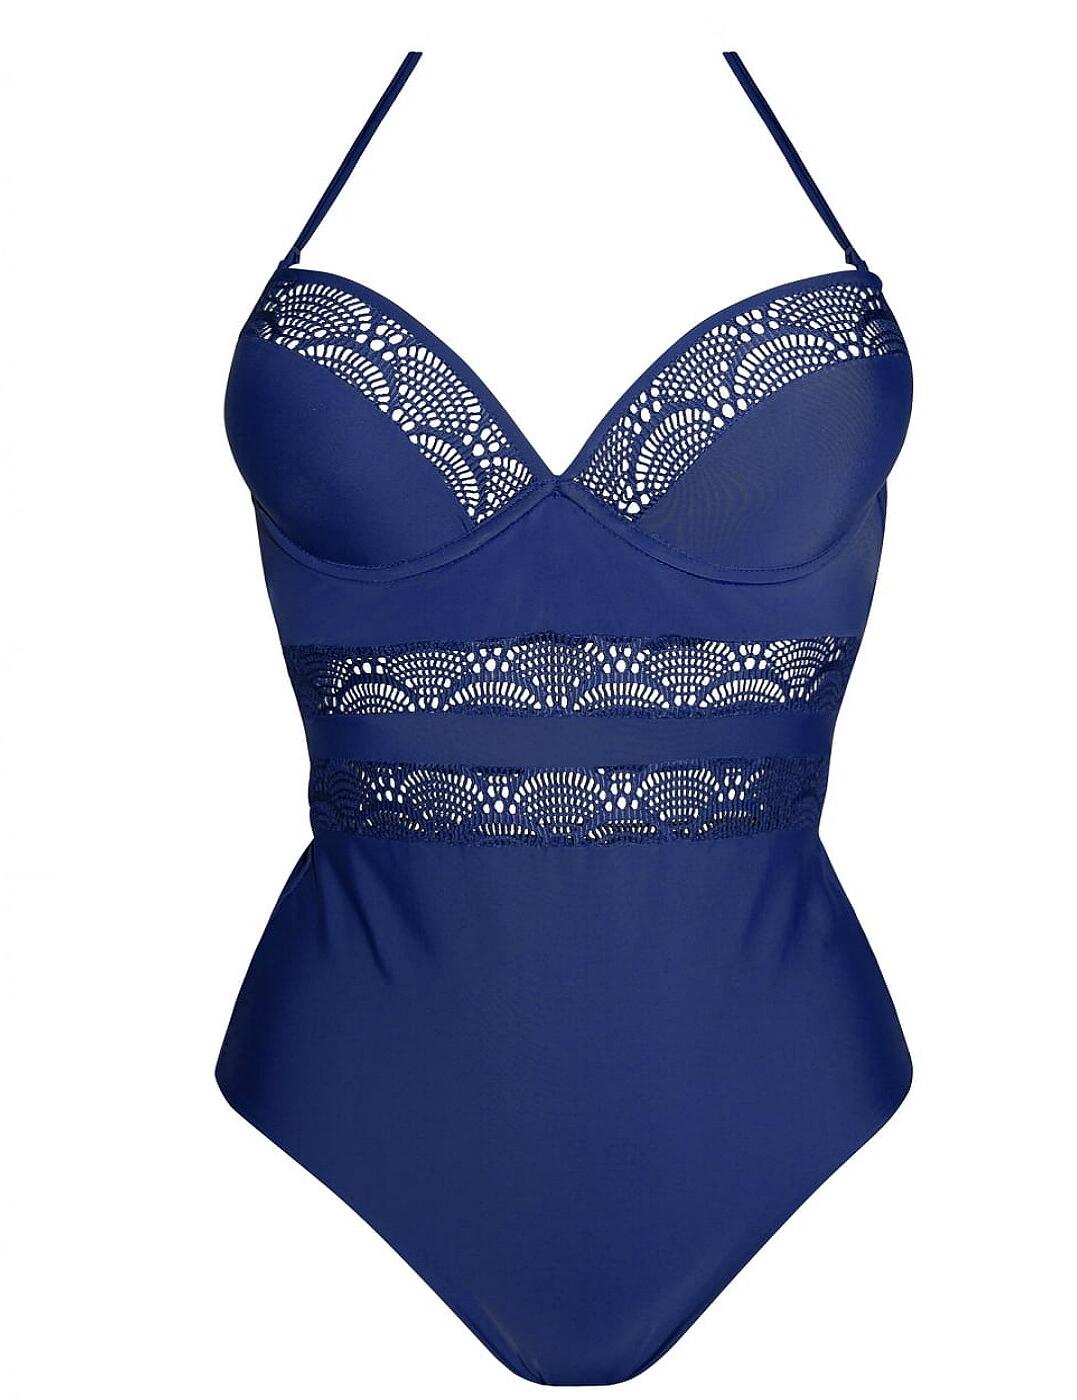 Ultimo OMG Lace Swimsuit - Belle Lingerie | Ultimo OMG Lace Swimsuit ...